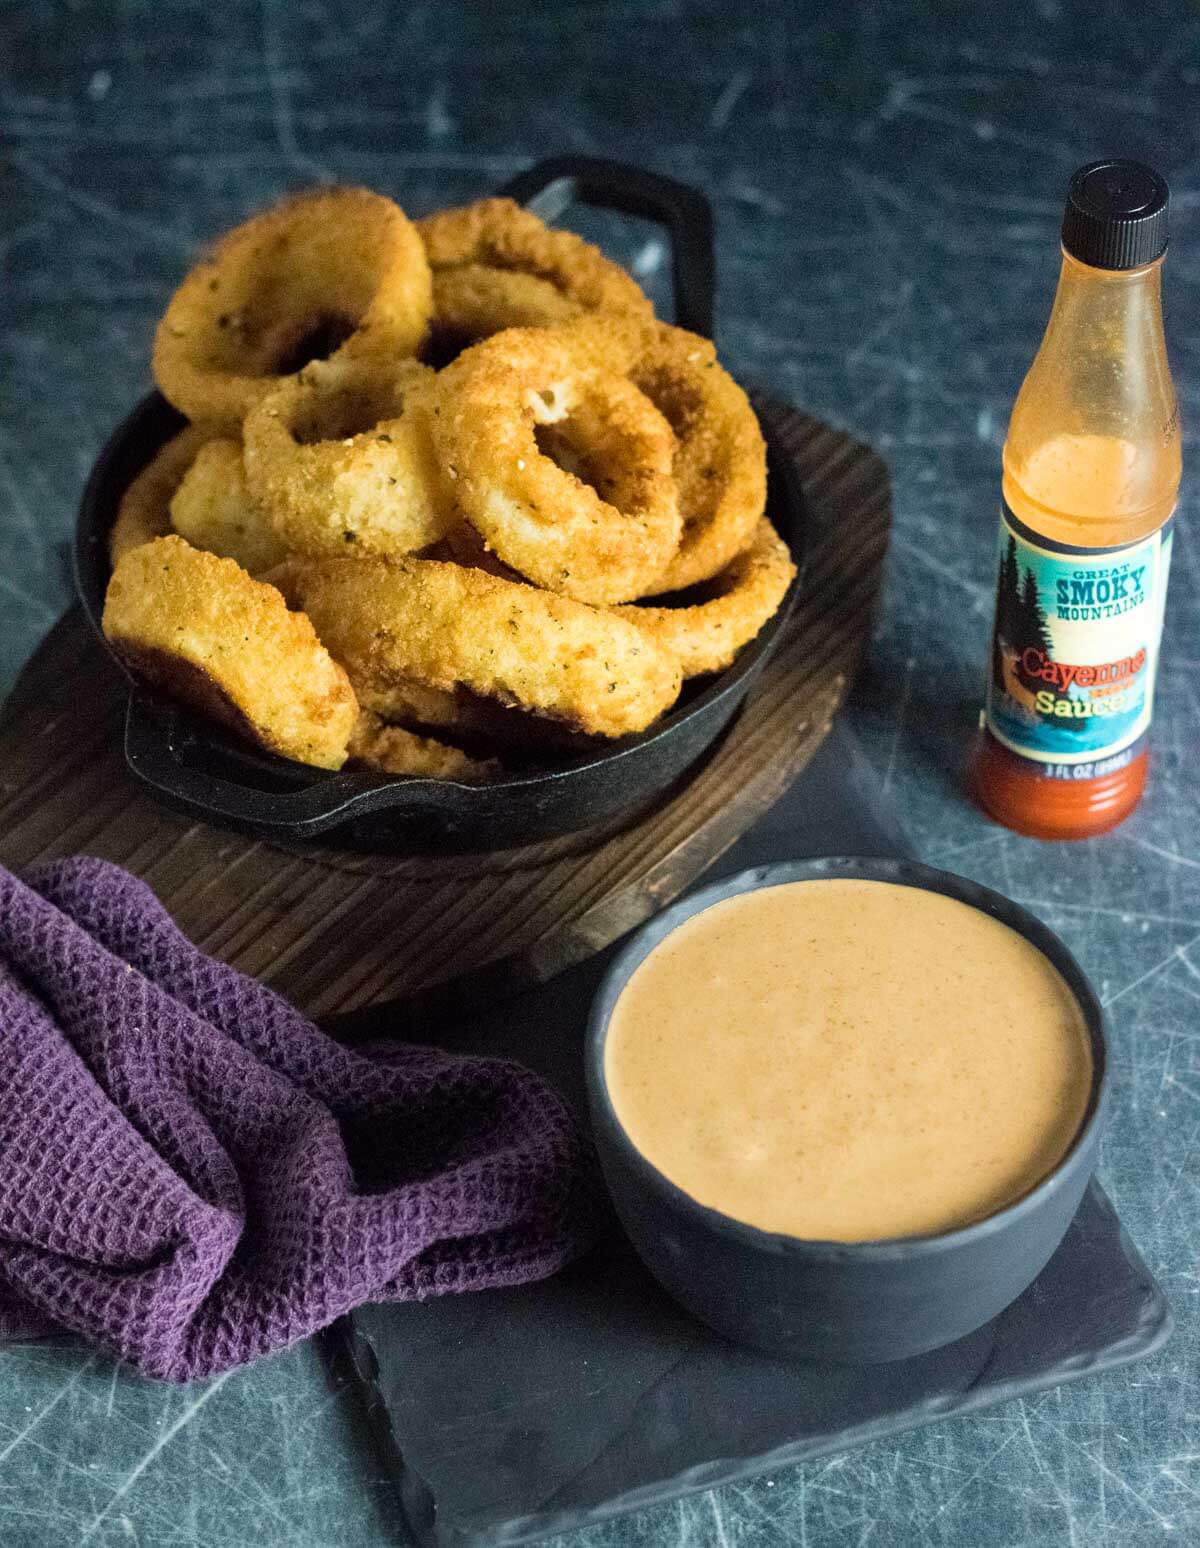 Spicy dipping sauce made with hot sauce.